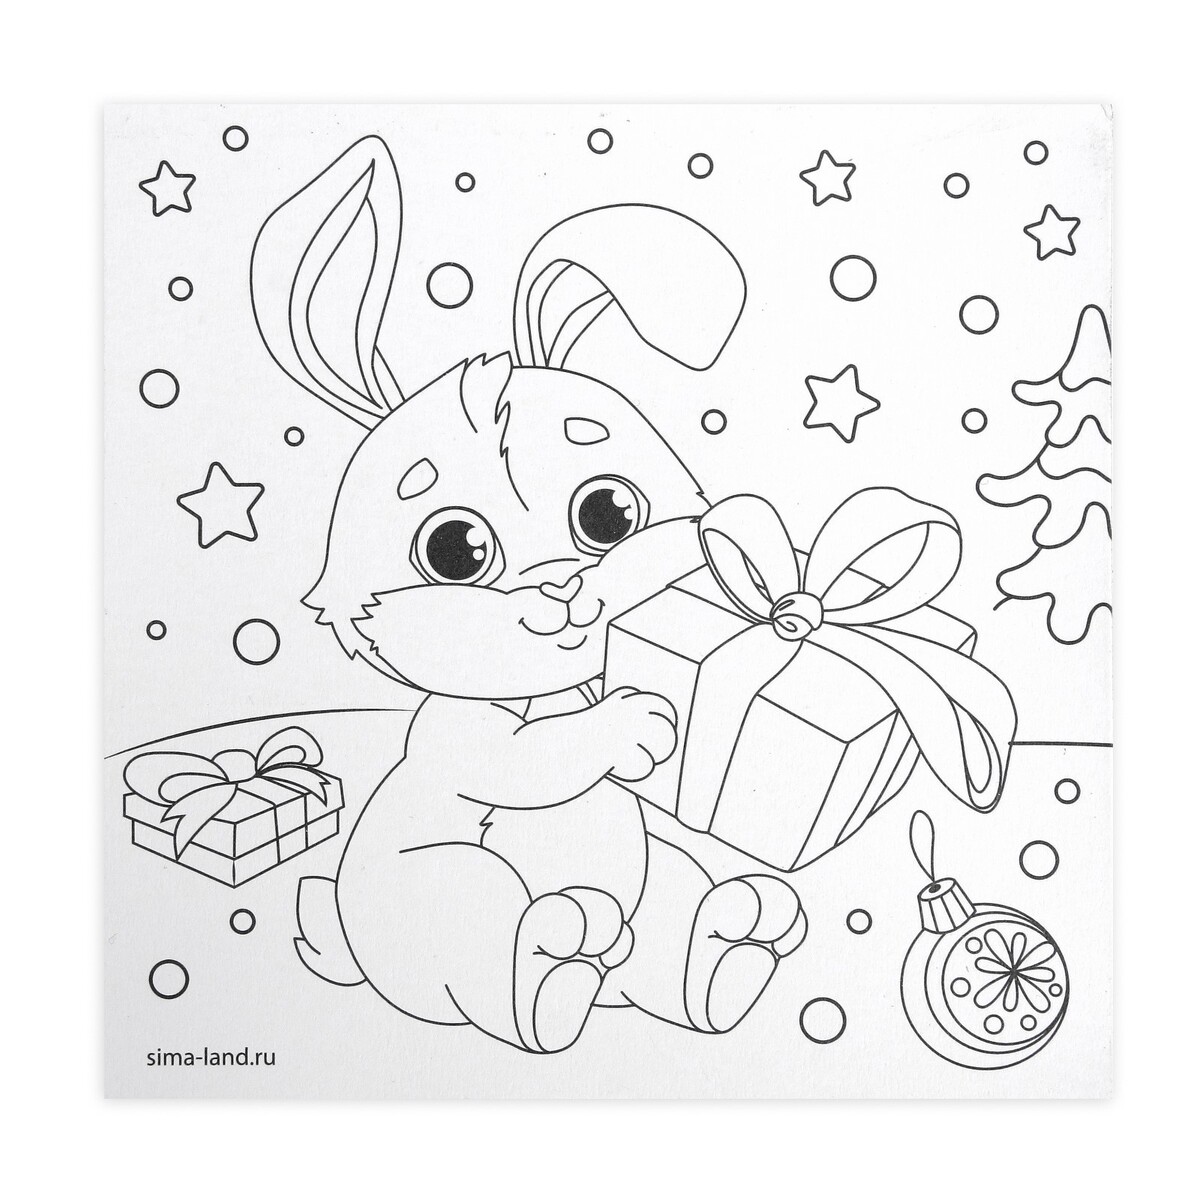 Bunny with a gift #9